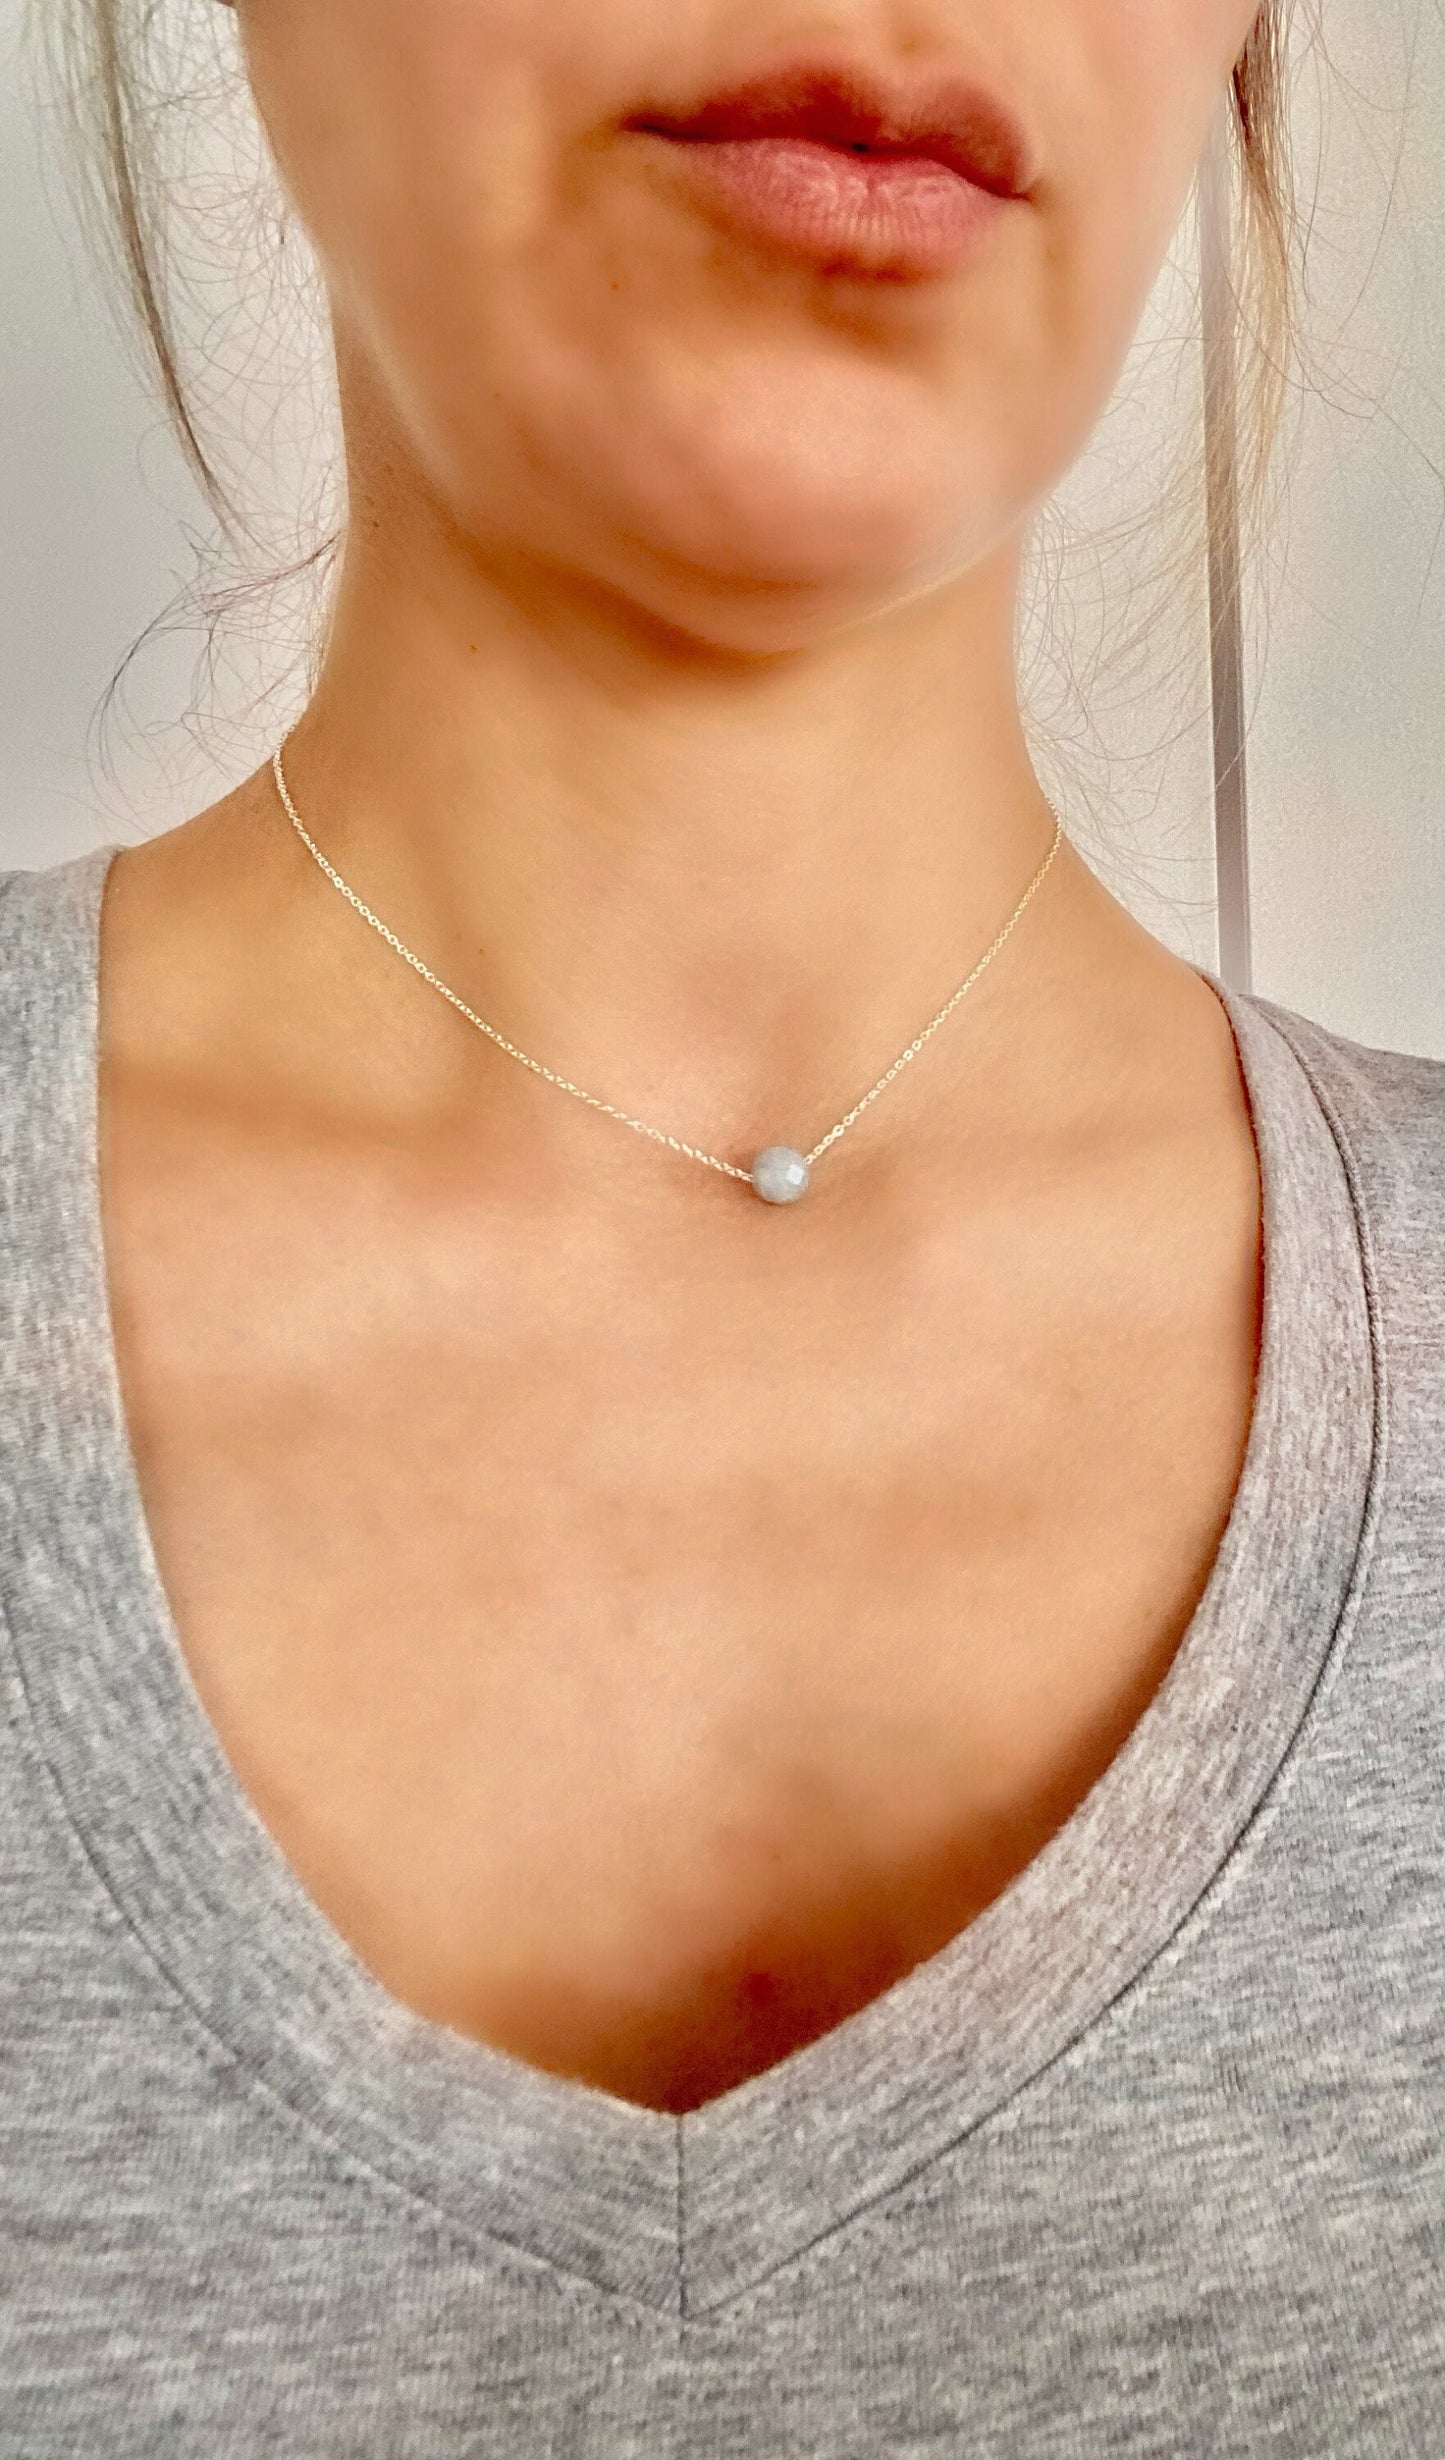 Minimalist crystal necklace, delicate faceted aquamarine stone necklace, stainless steel